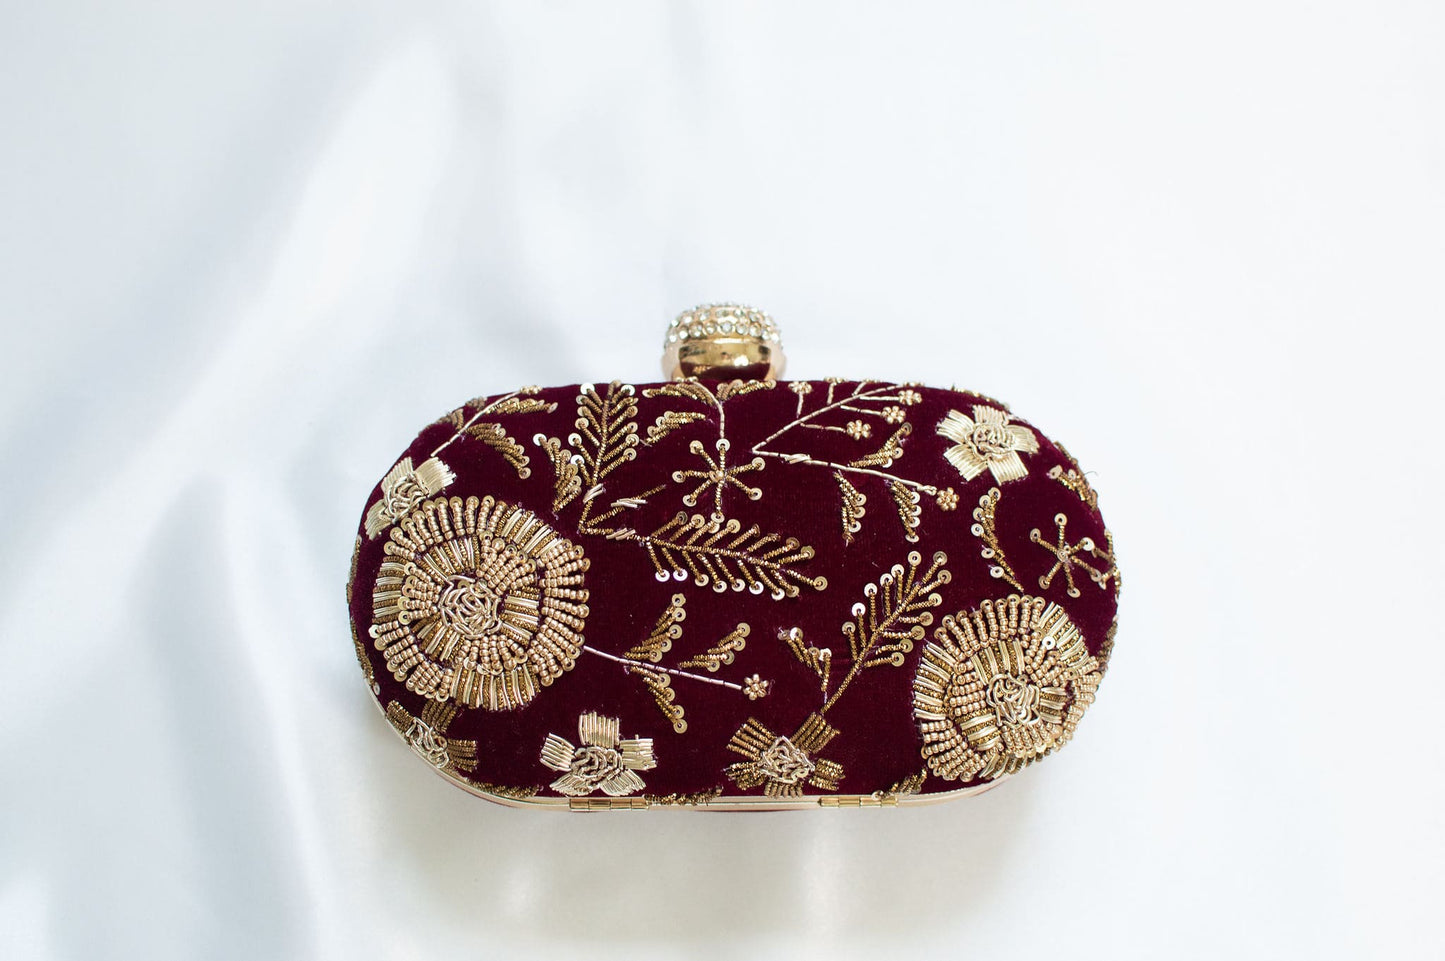 Burgundy clutch bag - ladies party purse for bridal occasions 